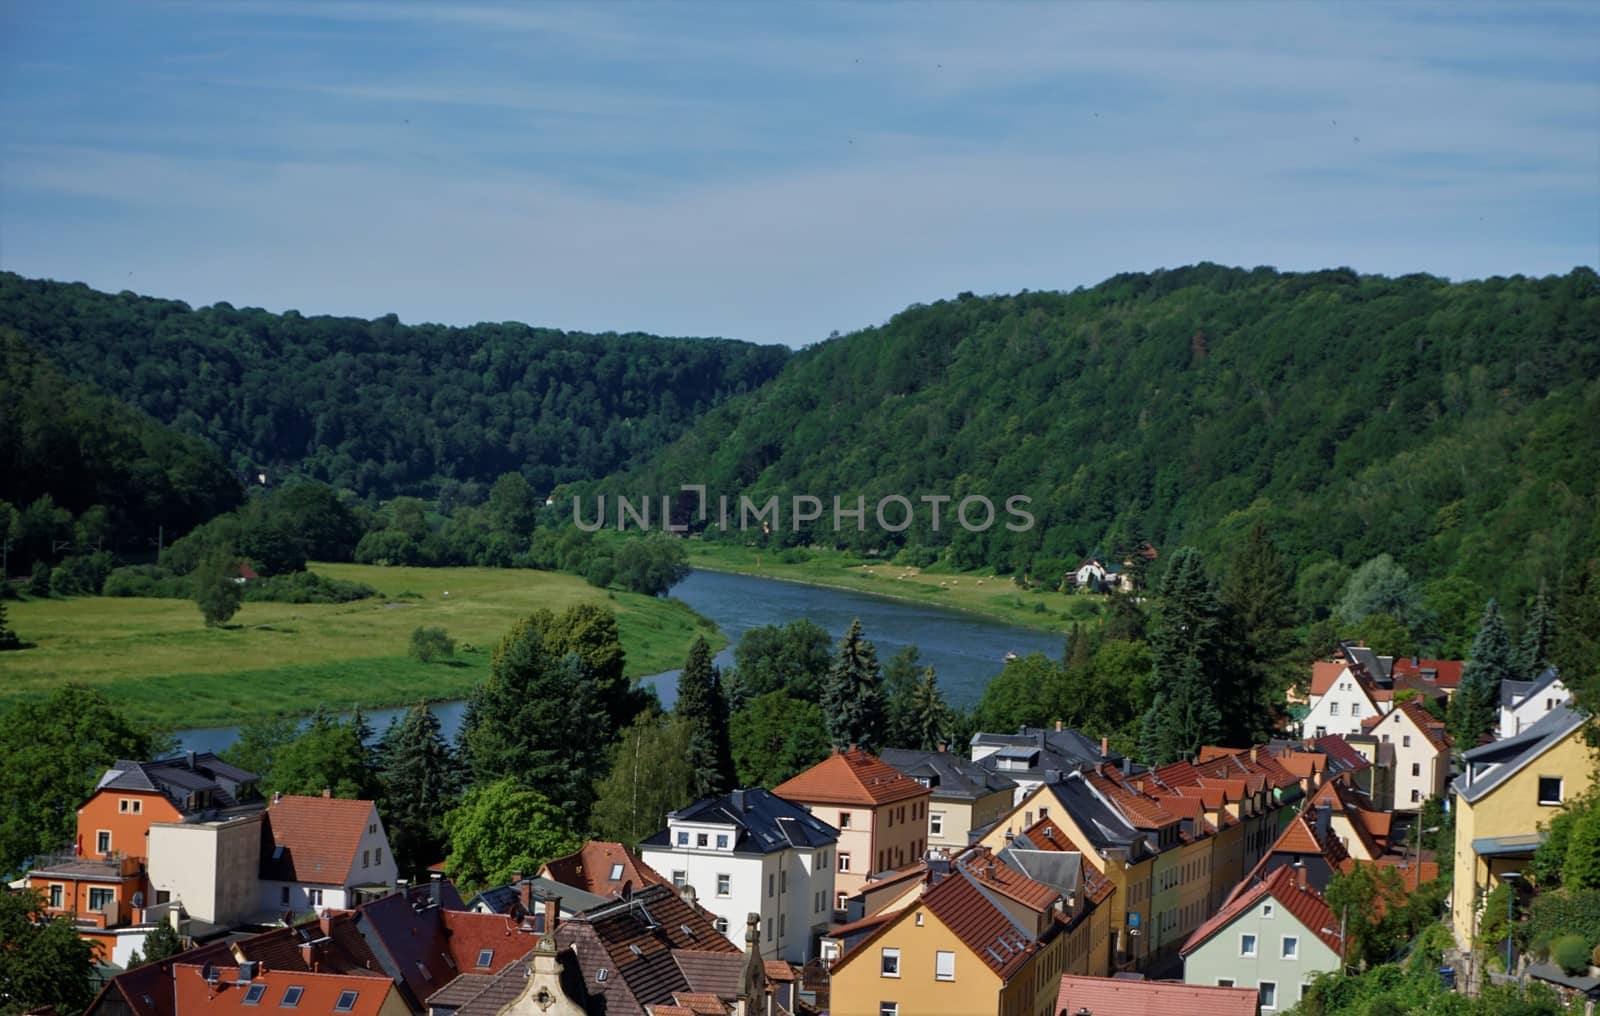 View over the Elbe river and residential homes in Stadt Wehlen by pisces2386